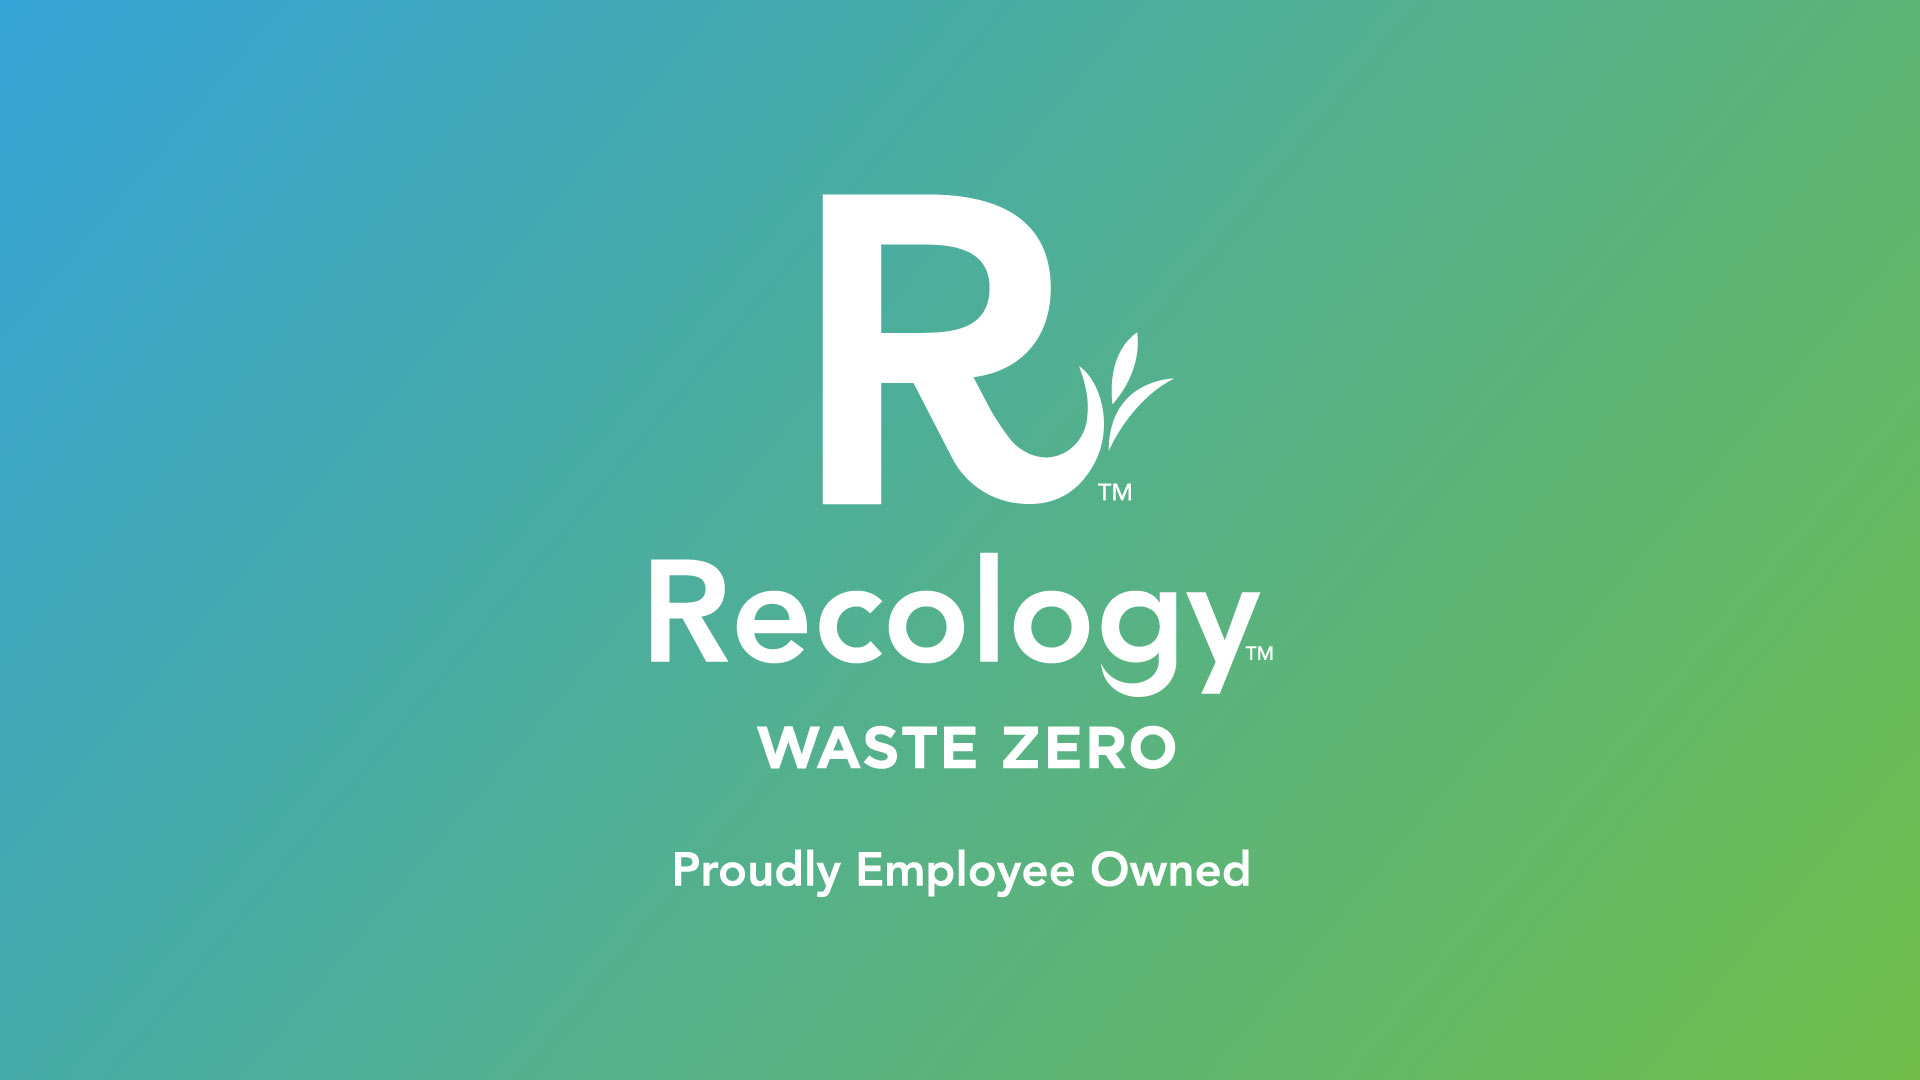 Recology, SF Controller Reach Agreement on Improved Rate-Setting Process, Resolve Past Issues